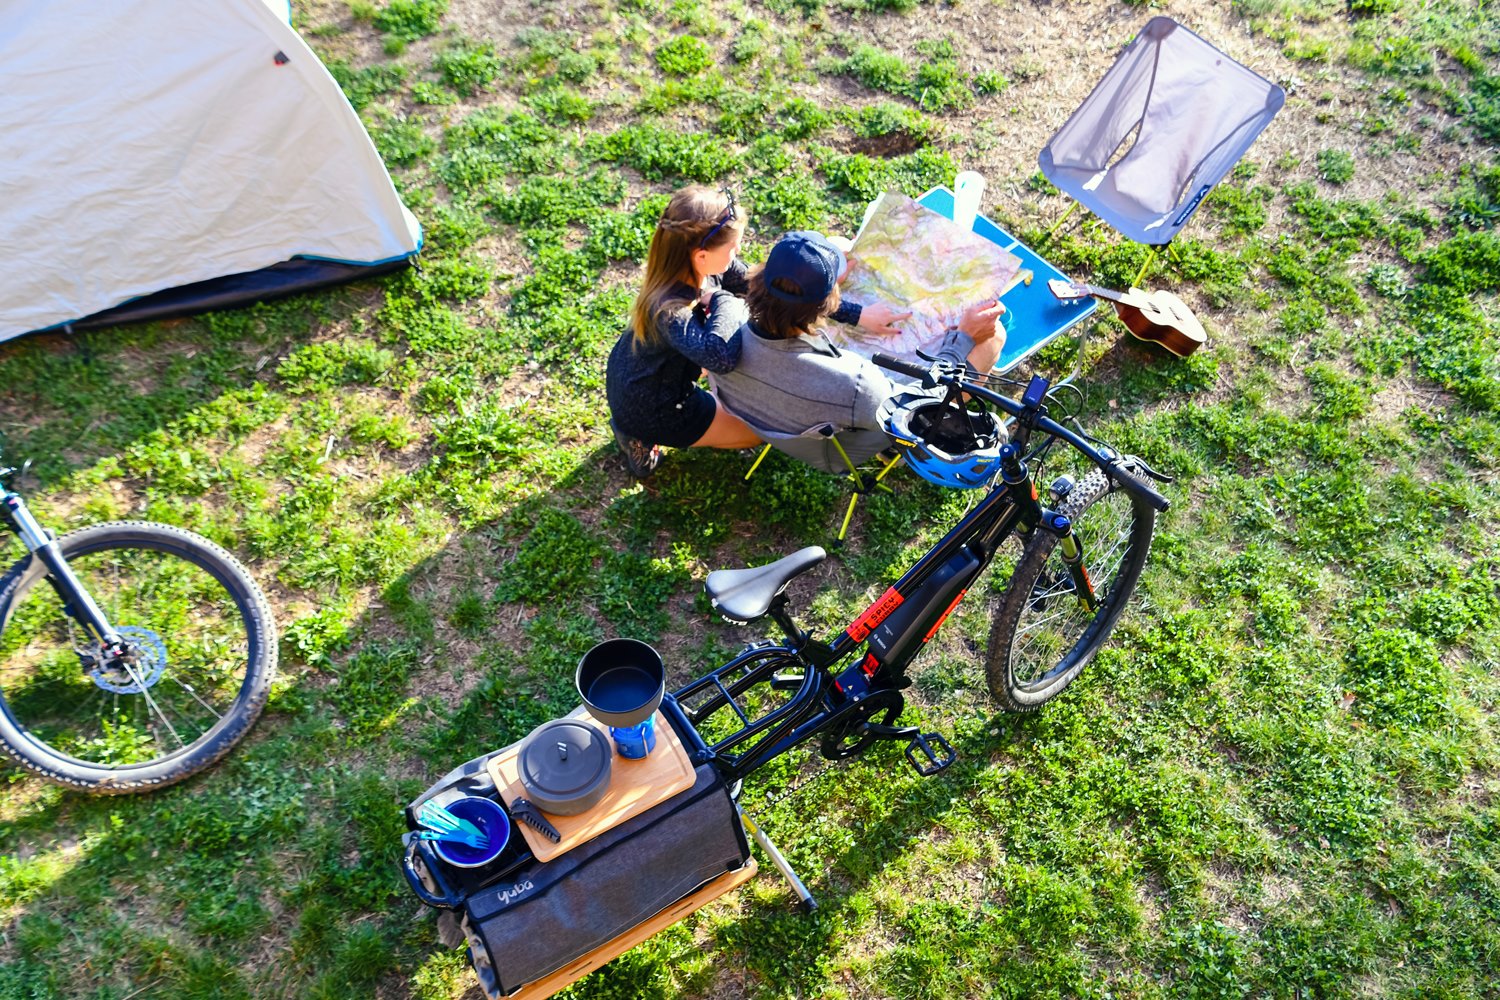 Yuba gears up for off-road cargo e-bike adventures w/ limited edition Spicy Curry AT